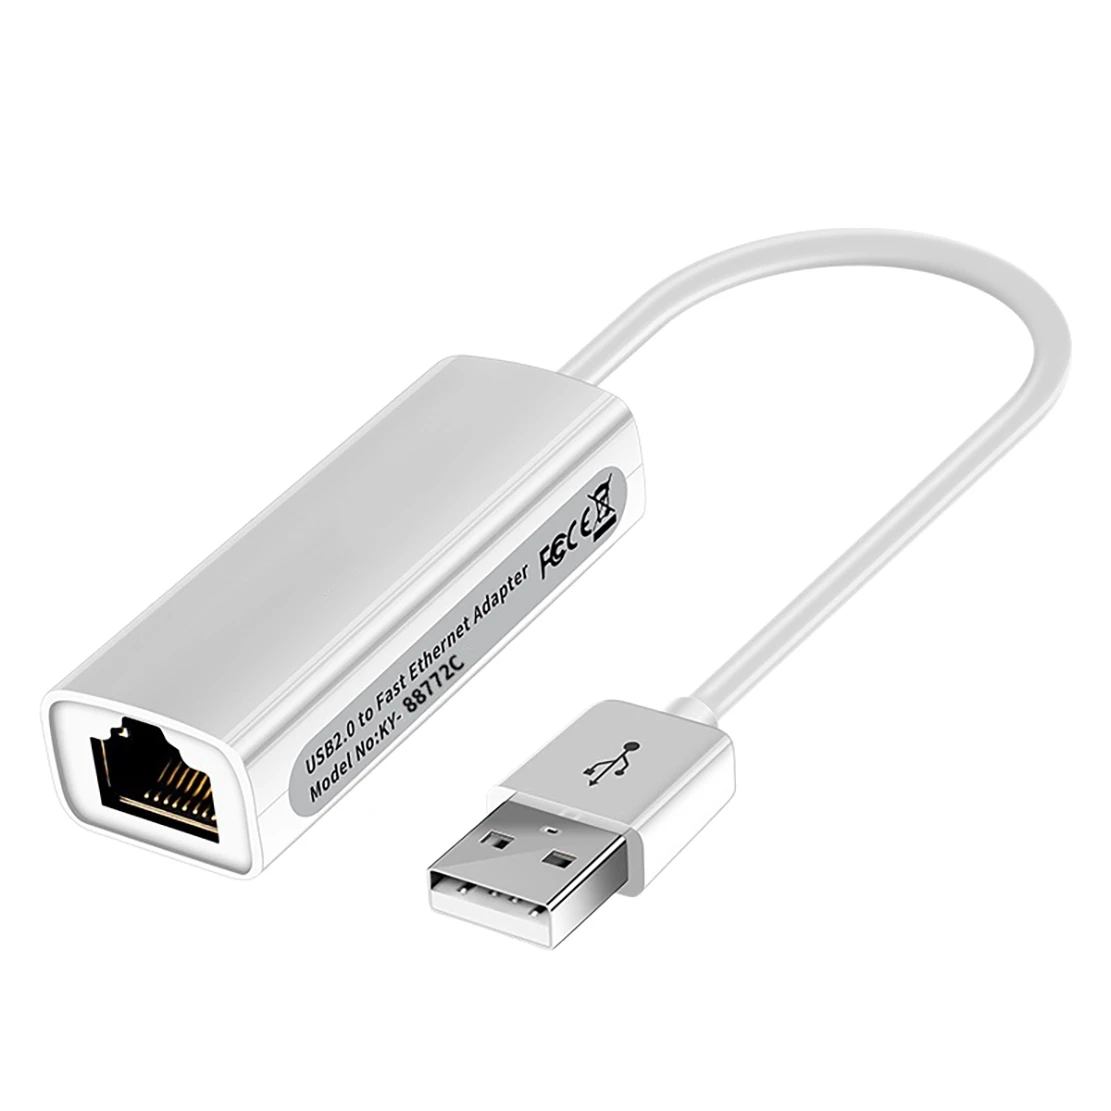 

USB2.0 20cm AX88772C Ethernet LAN Adapter Cable for Win95